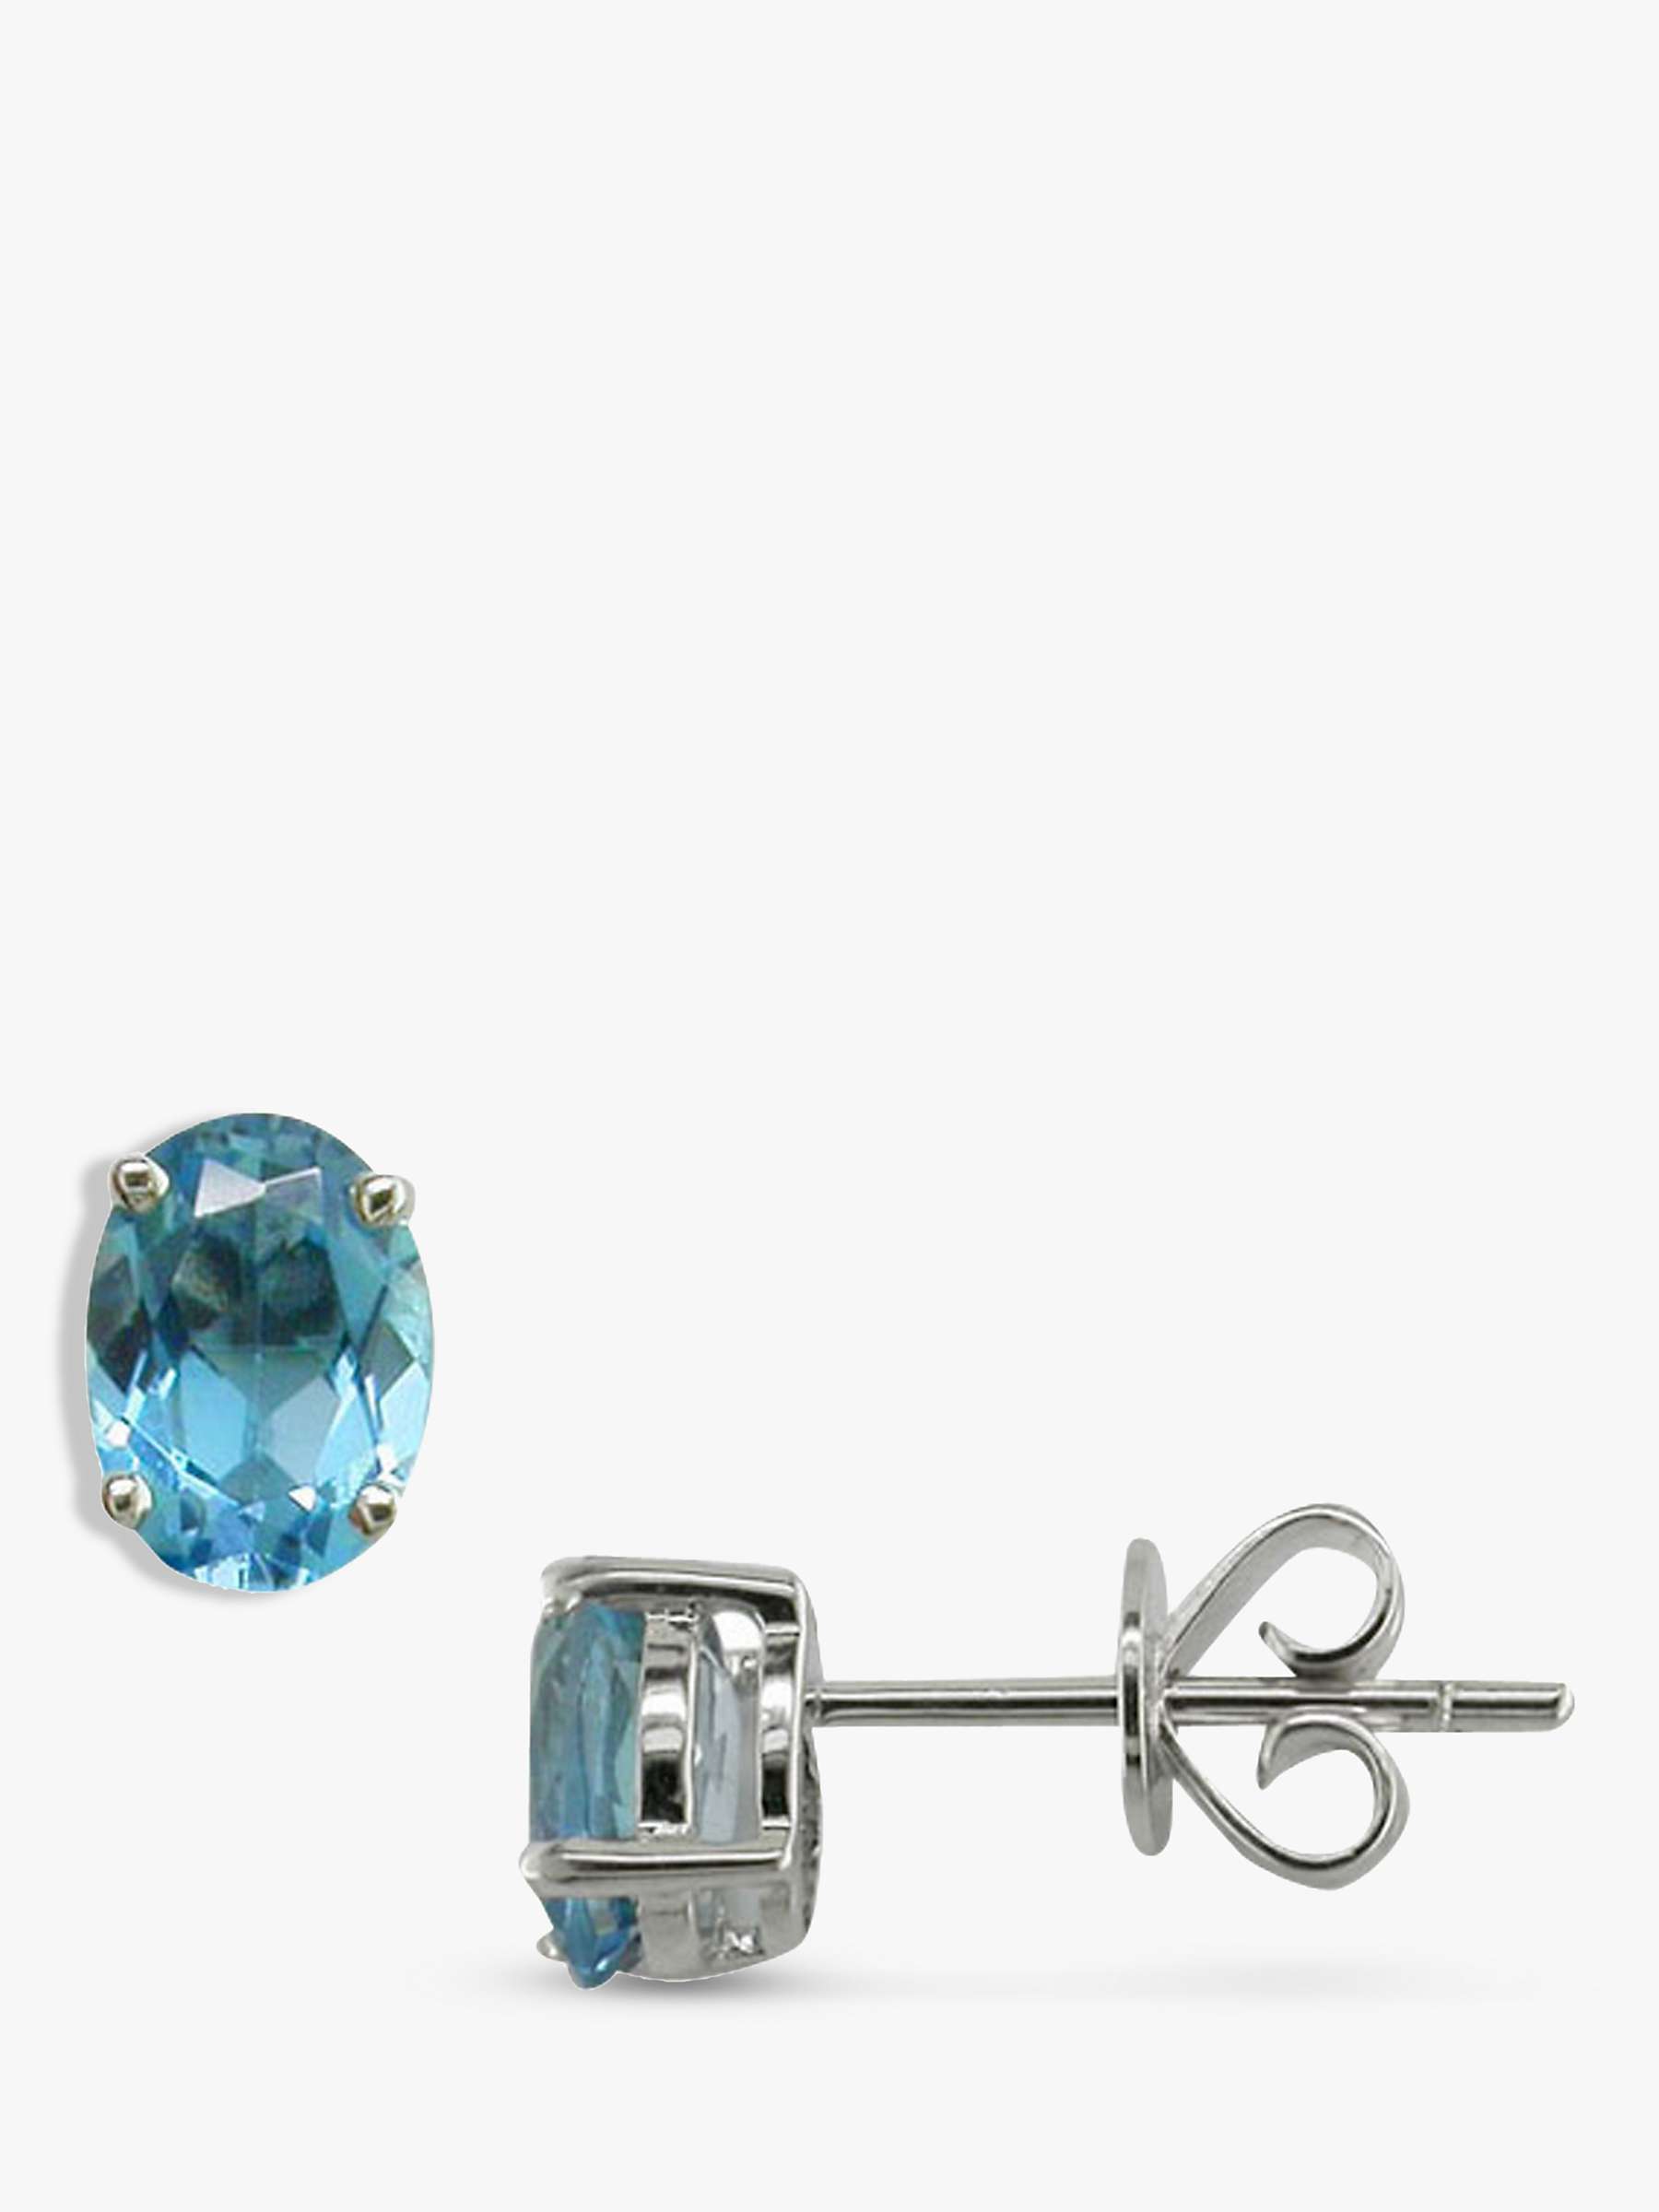 Buy E.W Adams 9ct White Gold Oval Stud Earrings Online at johnlewis.com